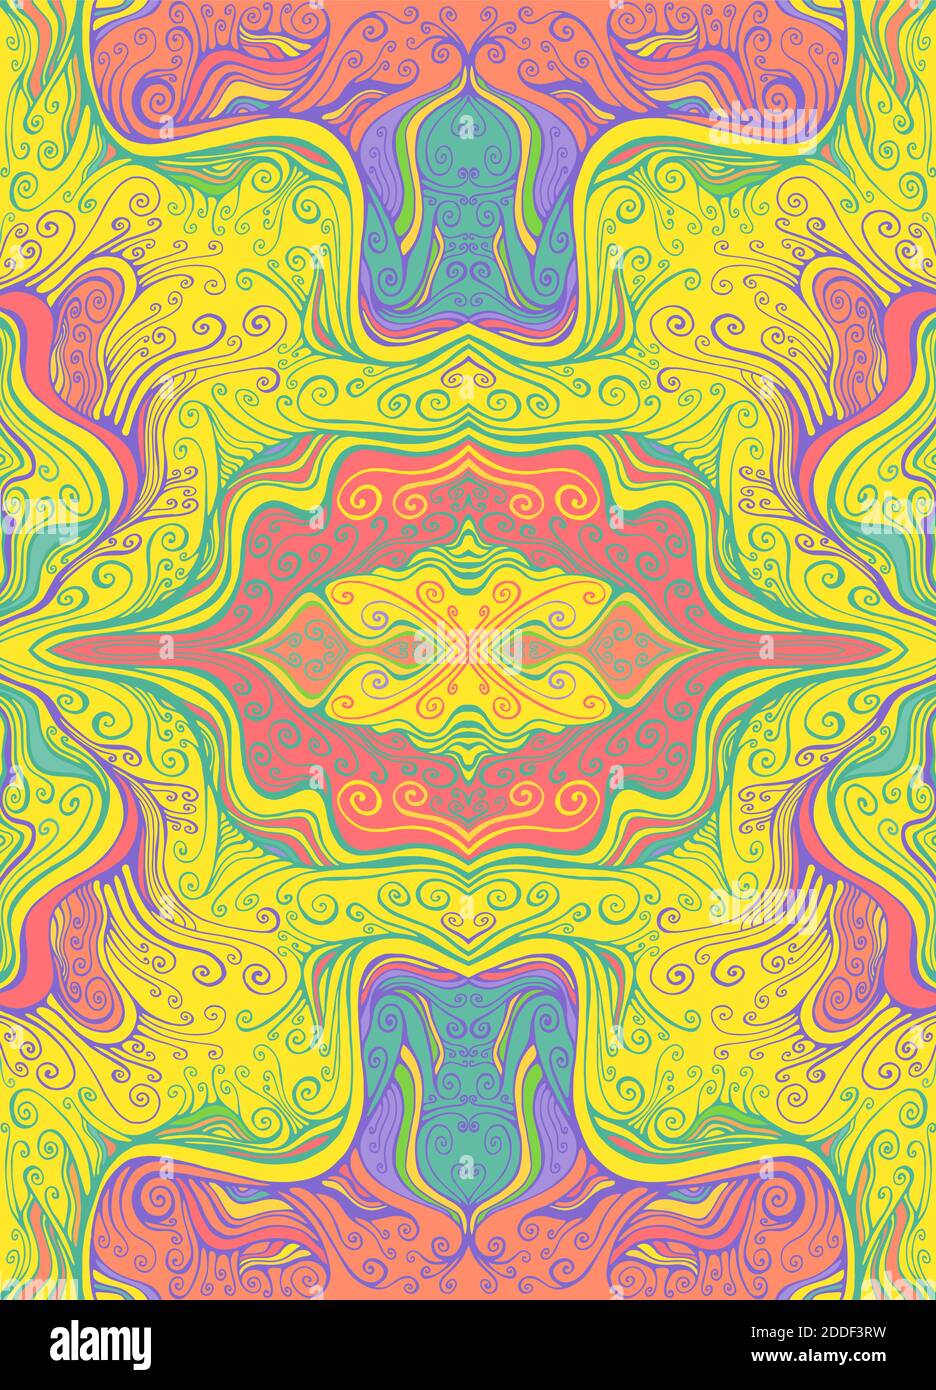 Psychedelic colorful waves kaleidoscope background, hippie style. Stock Vector